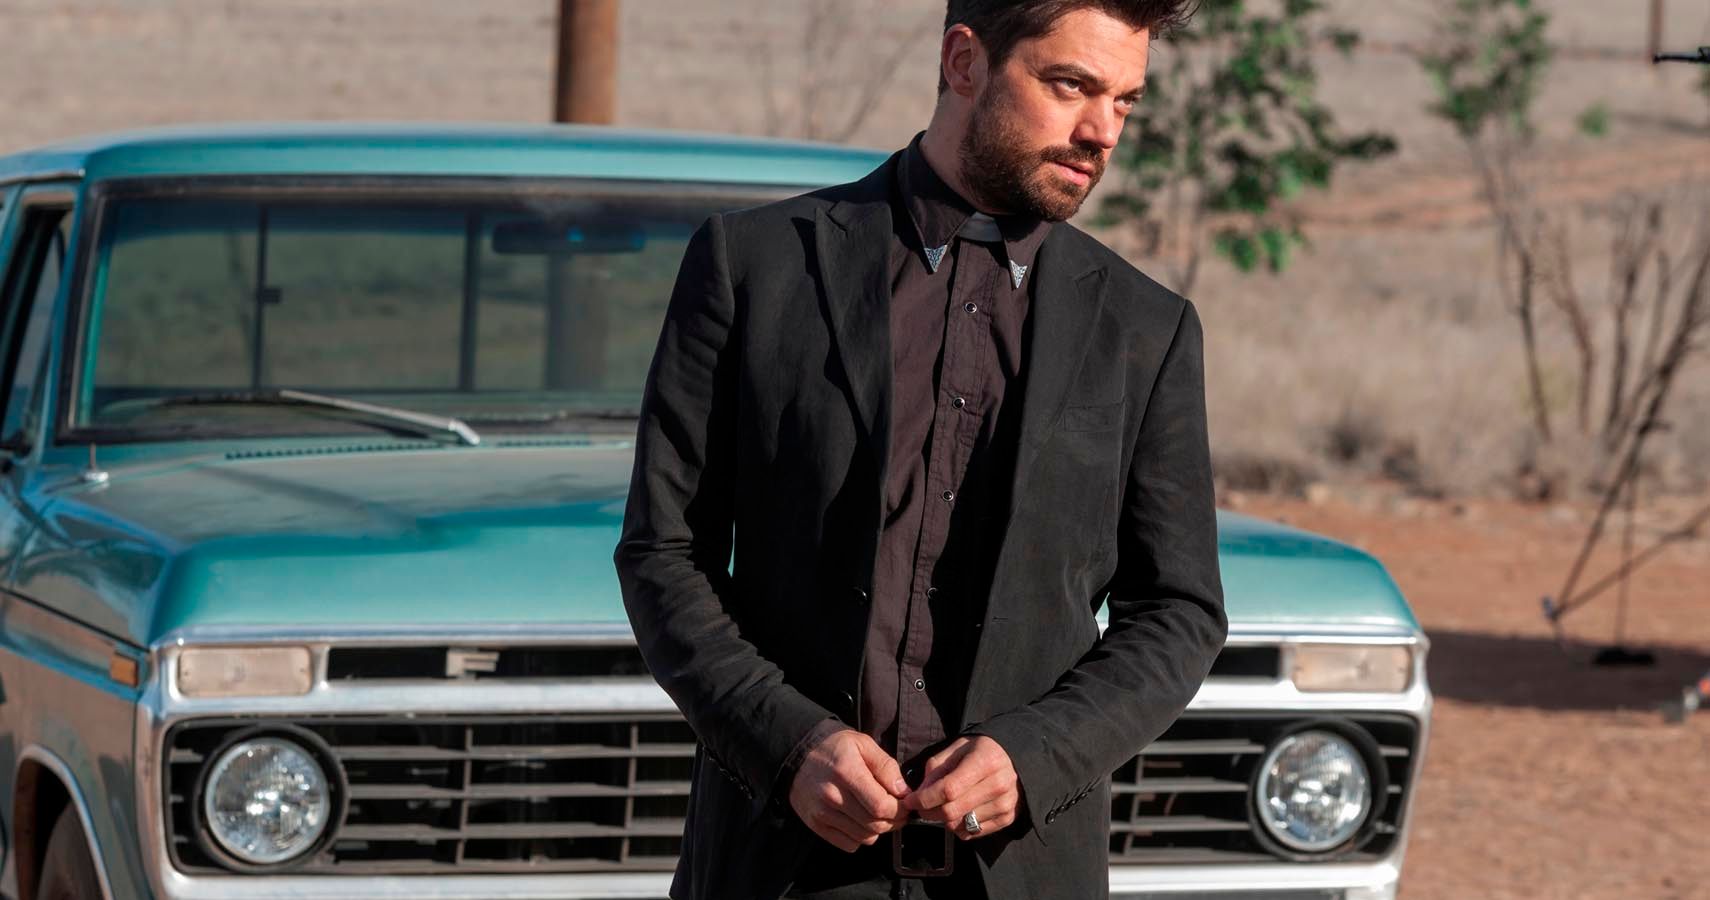 10 Things That Need To Happen Before Preacher Ends